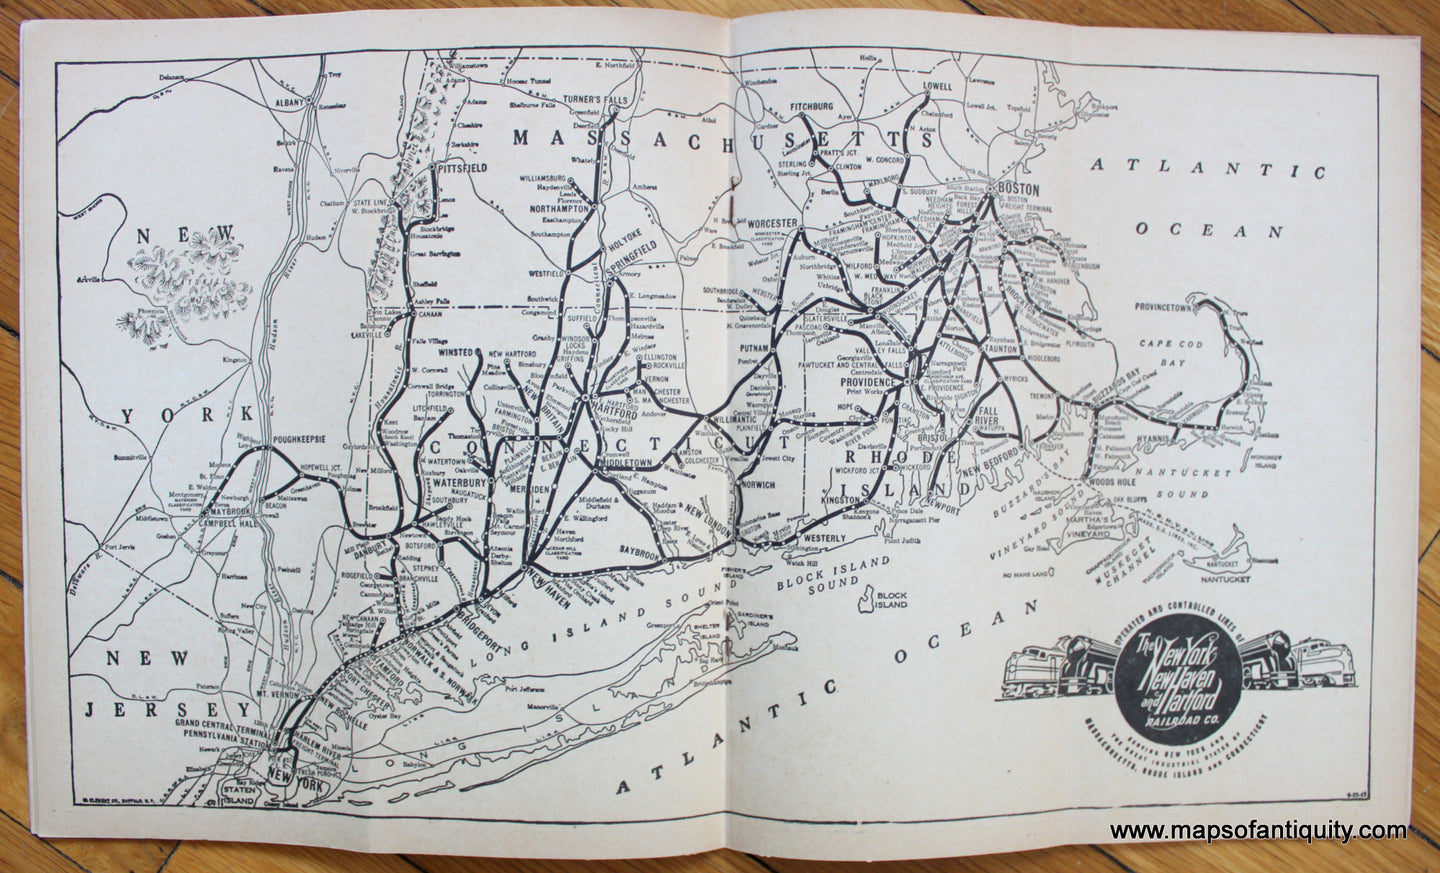 Uncolored-Antique-Booklet-with-Map-The-New-York-New-Haven-and-Hartford-Railroad-Co.-1947-Timetable-with-Map-New-England--1947-The-New-York-New-Haven-and-Hartford-Railroad-Co.-Maps-Of-Antiquity